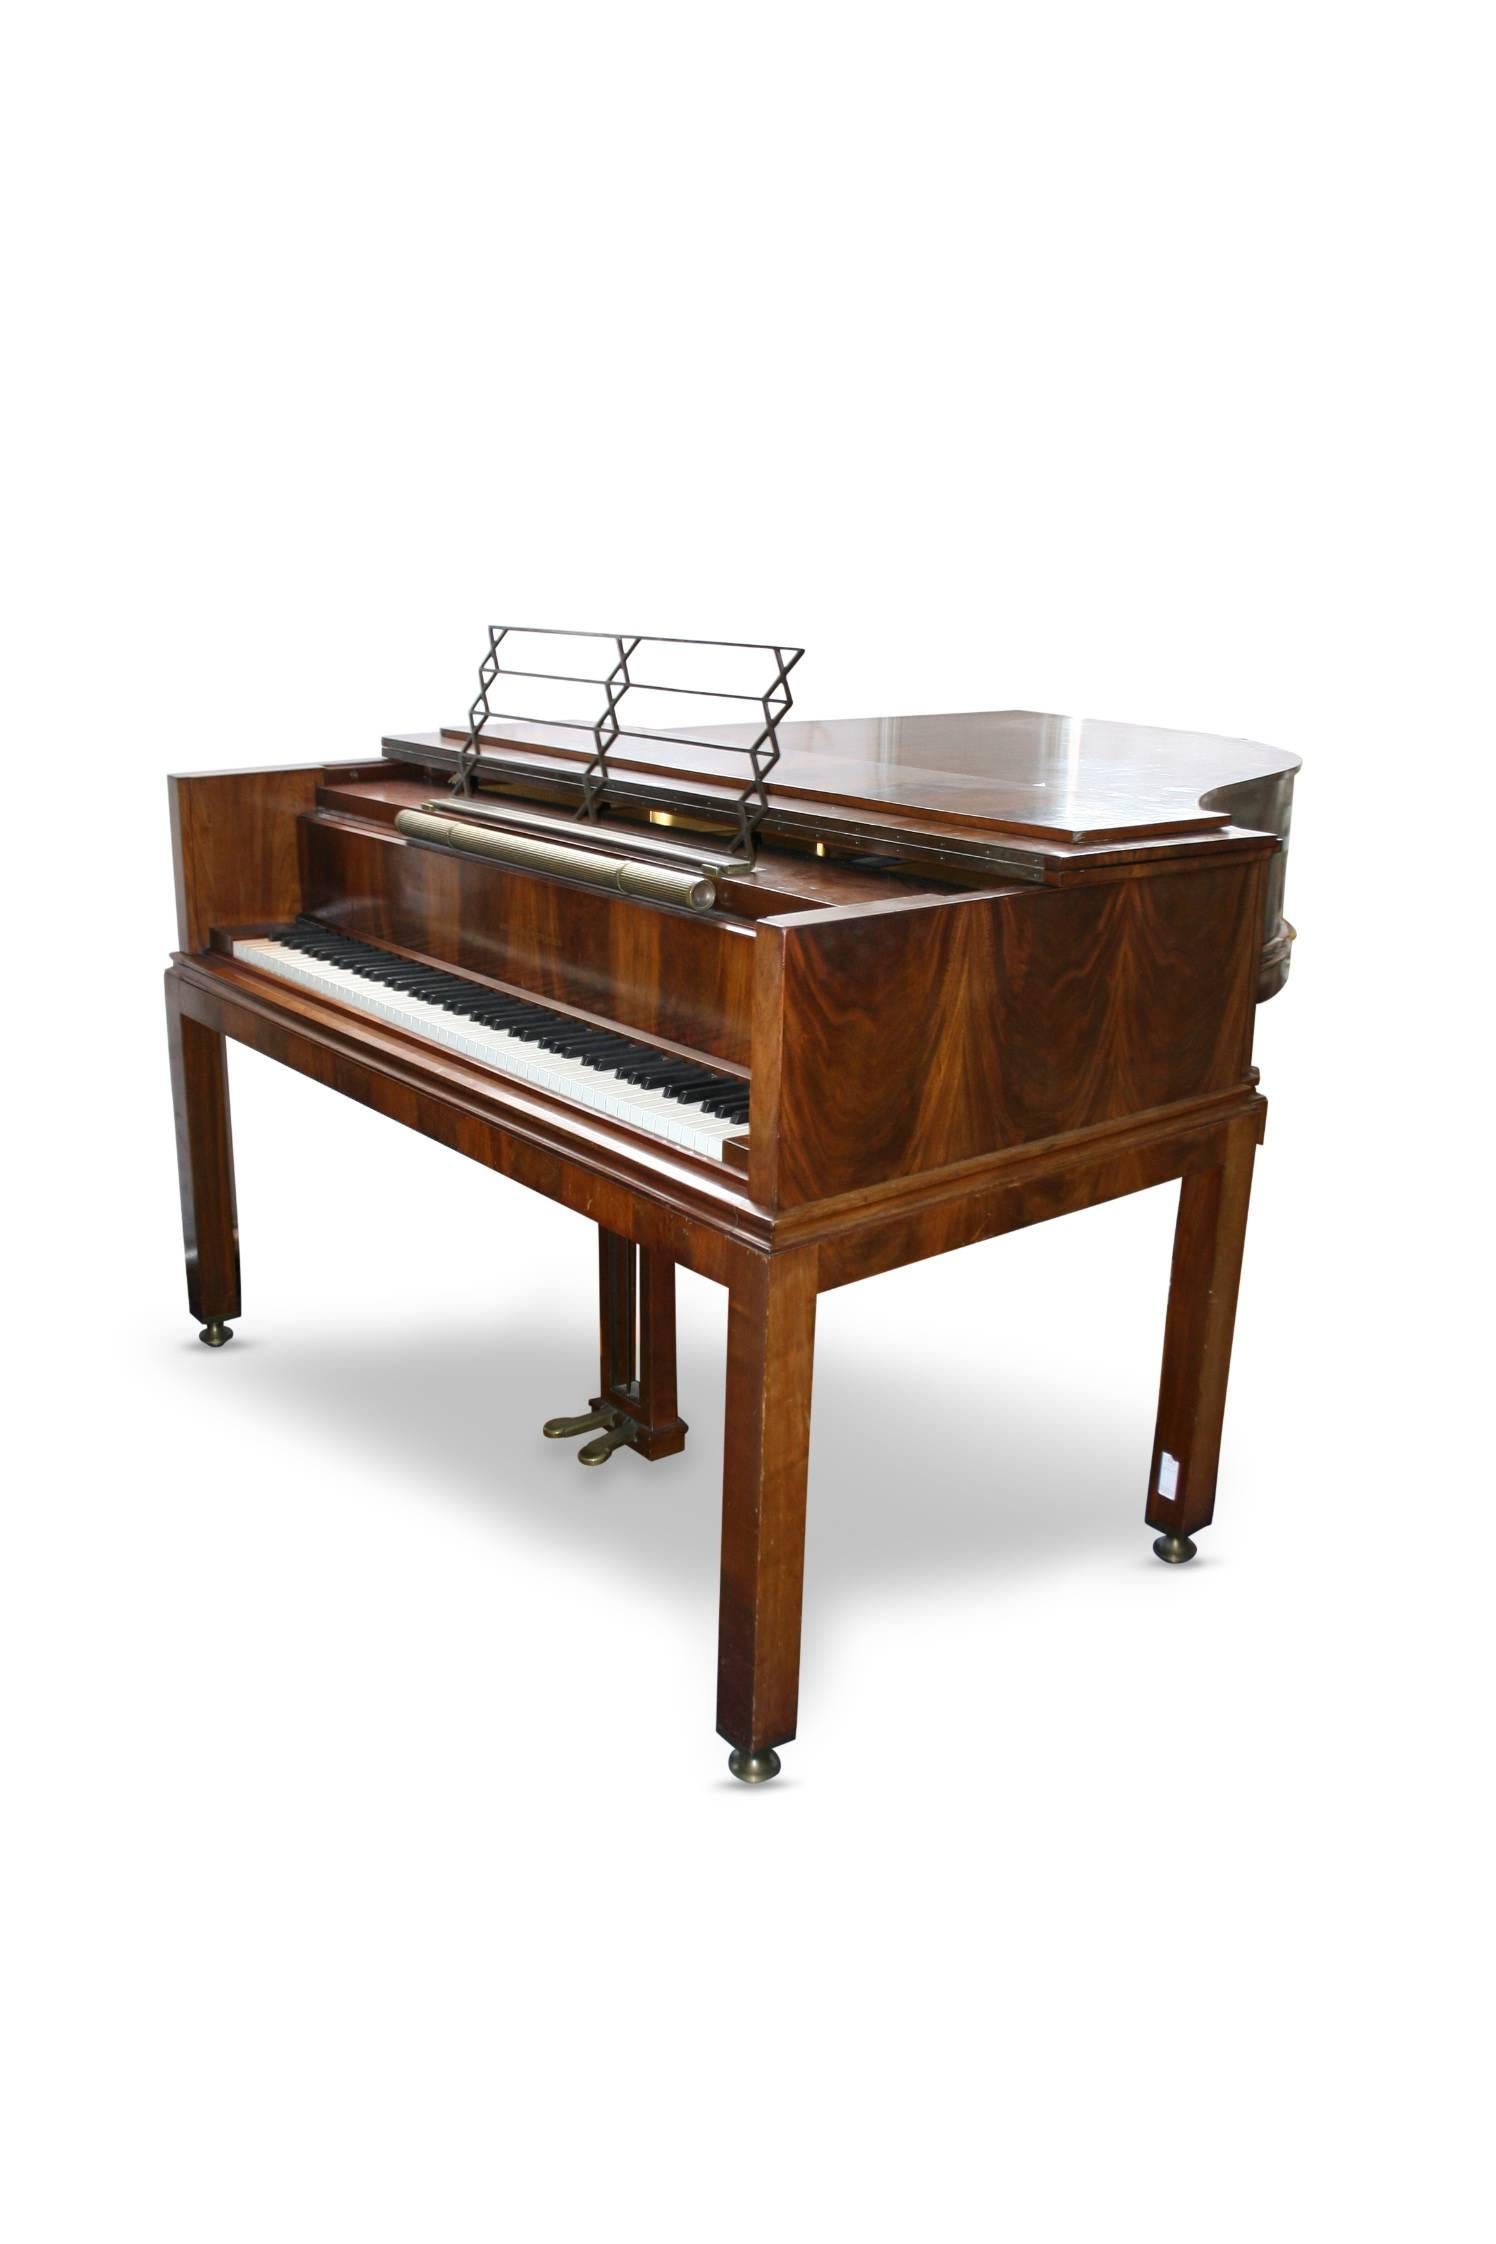 Unique grand piano of mahogany designed by renowned architect Bent Helweg-Moller and made by Denmark's leading piano maker in 1929. On four legged frame with brass shoes. Seven octaves, mounted with sheet holder and brass lamp with up-light, light